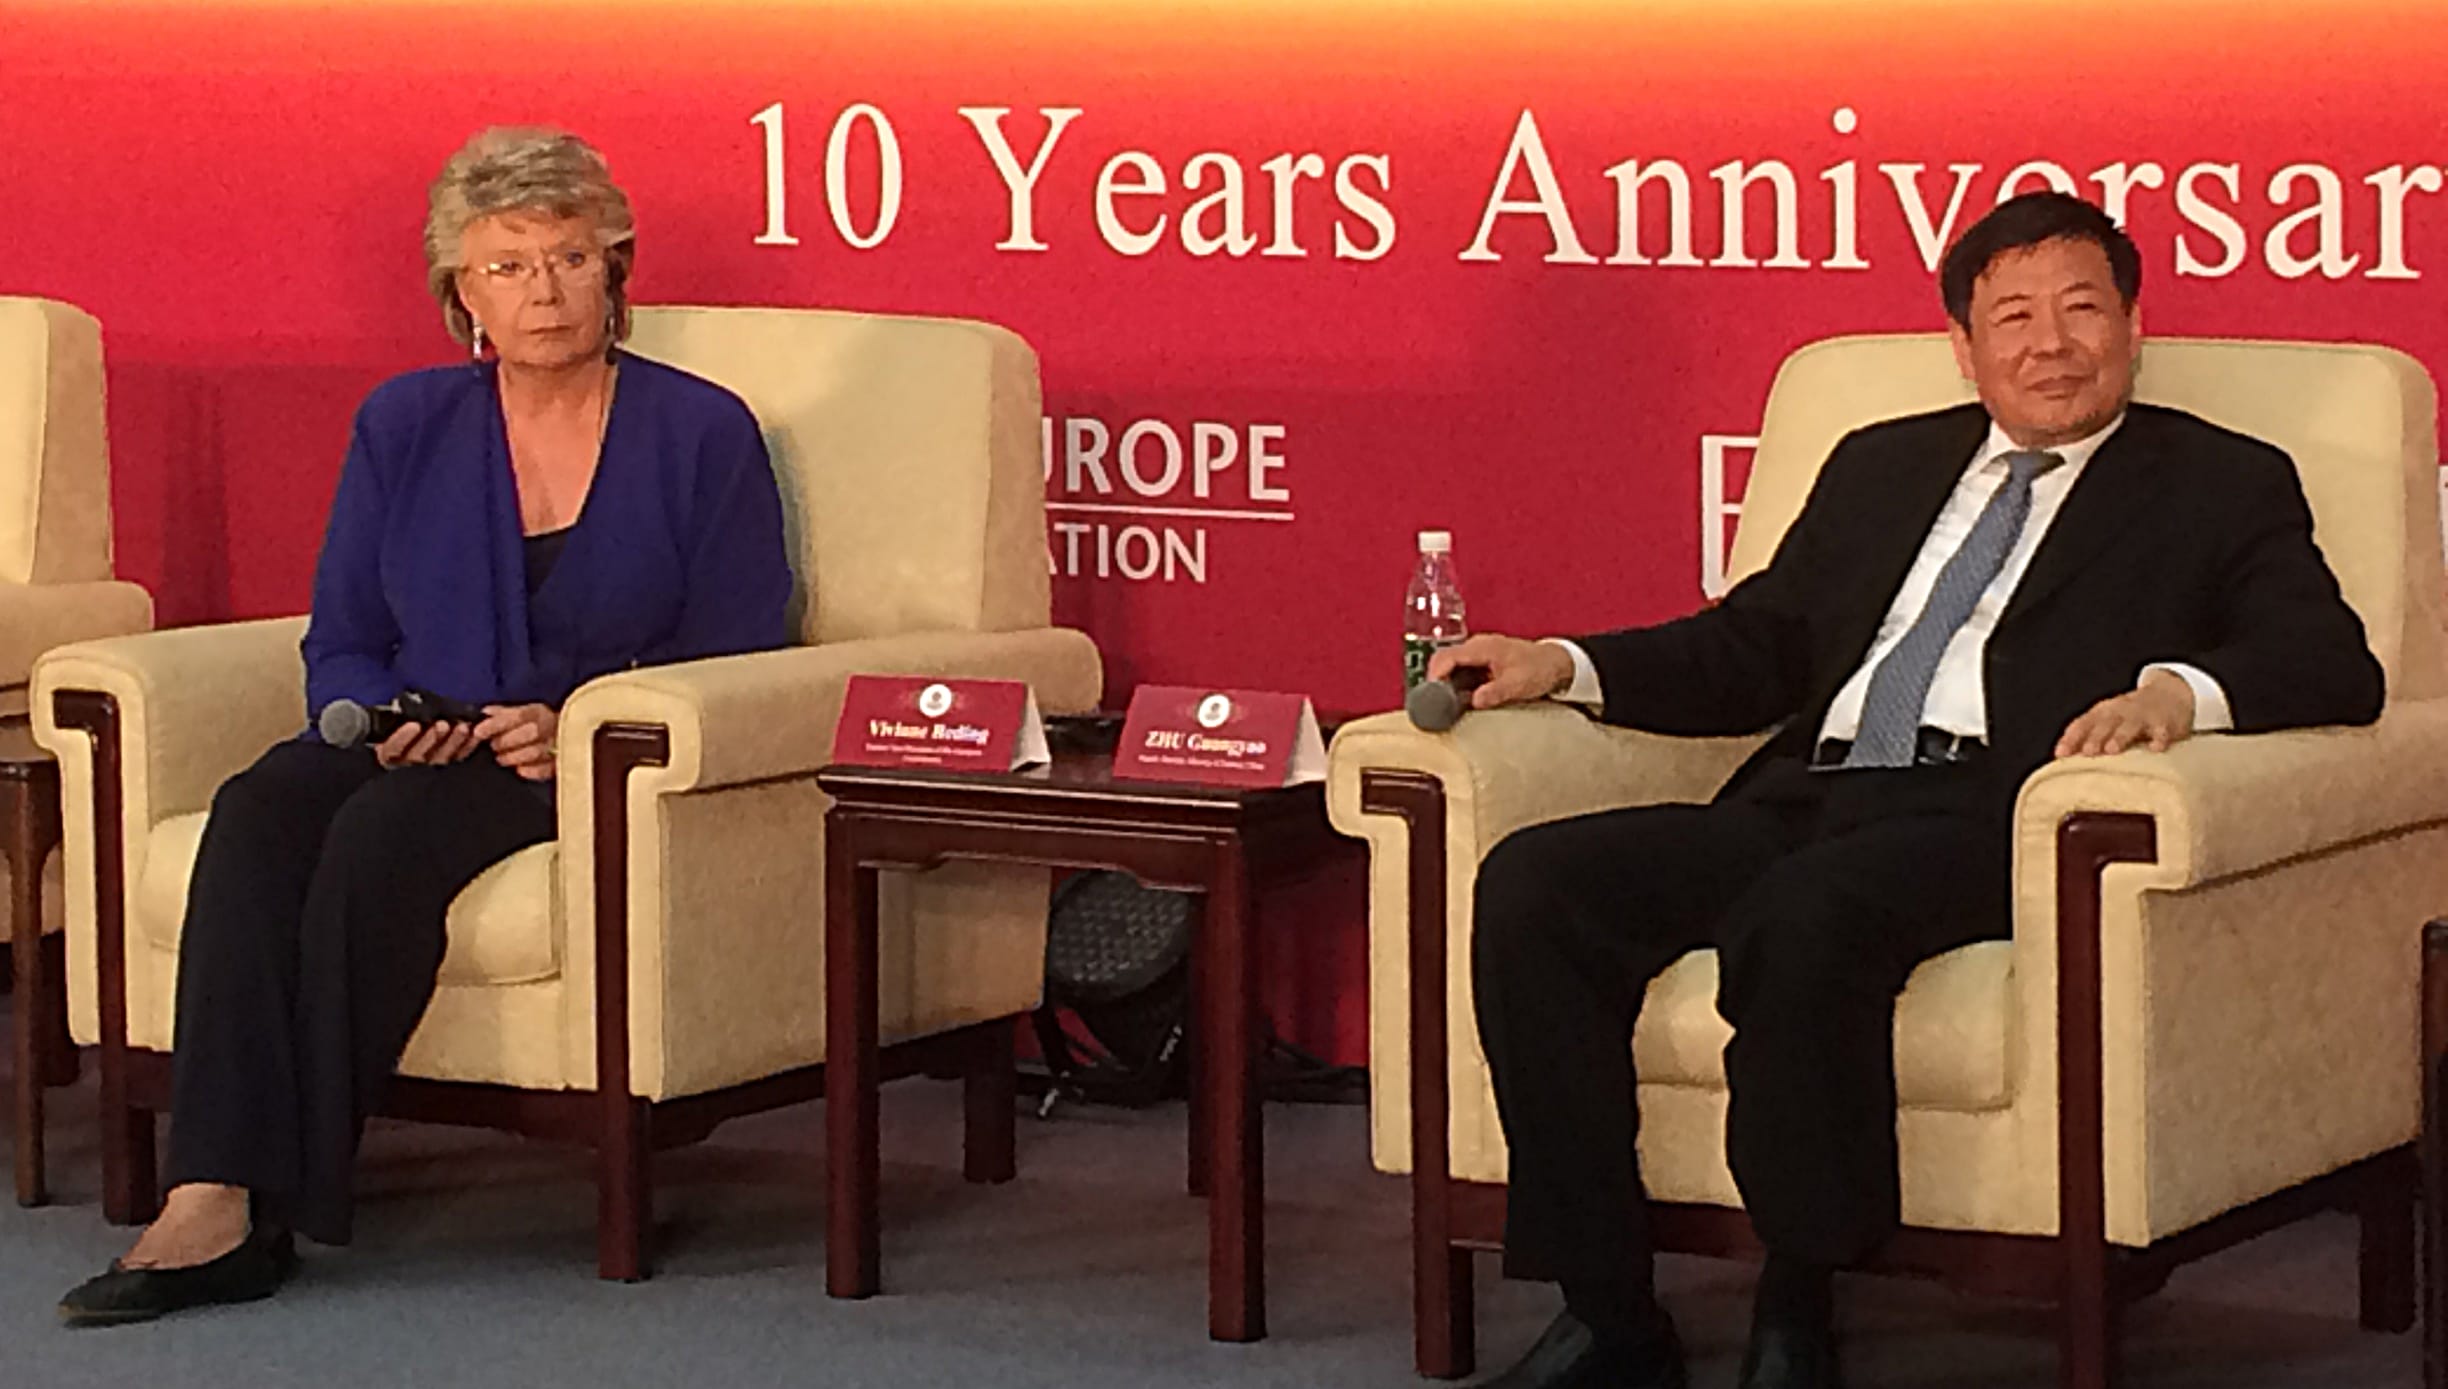 Viviane Reding and Zhu Guangyao at AEEF Public Session